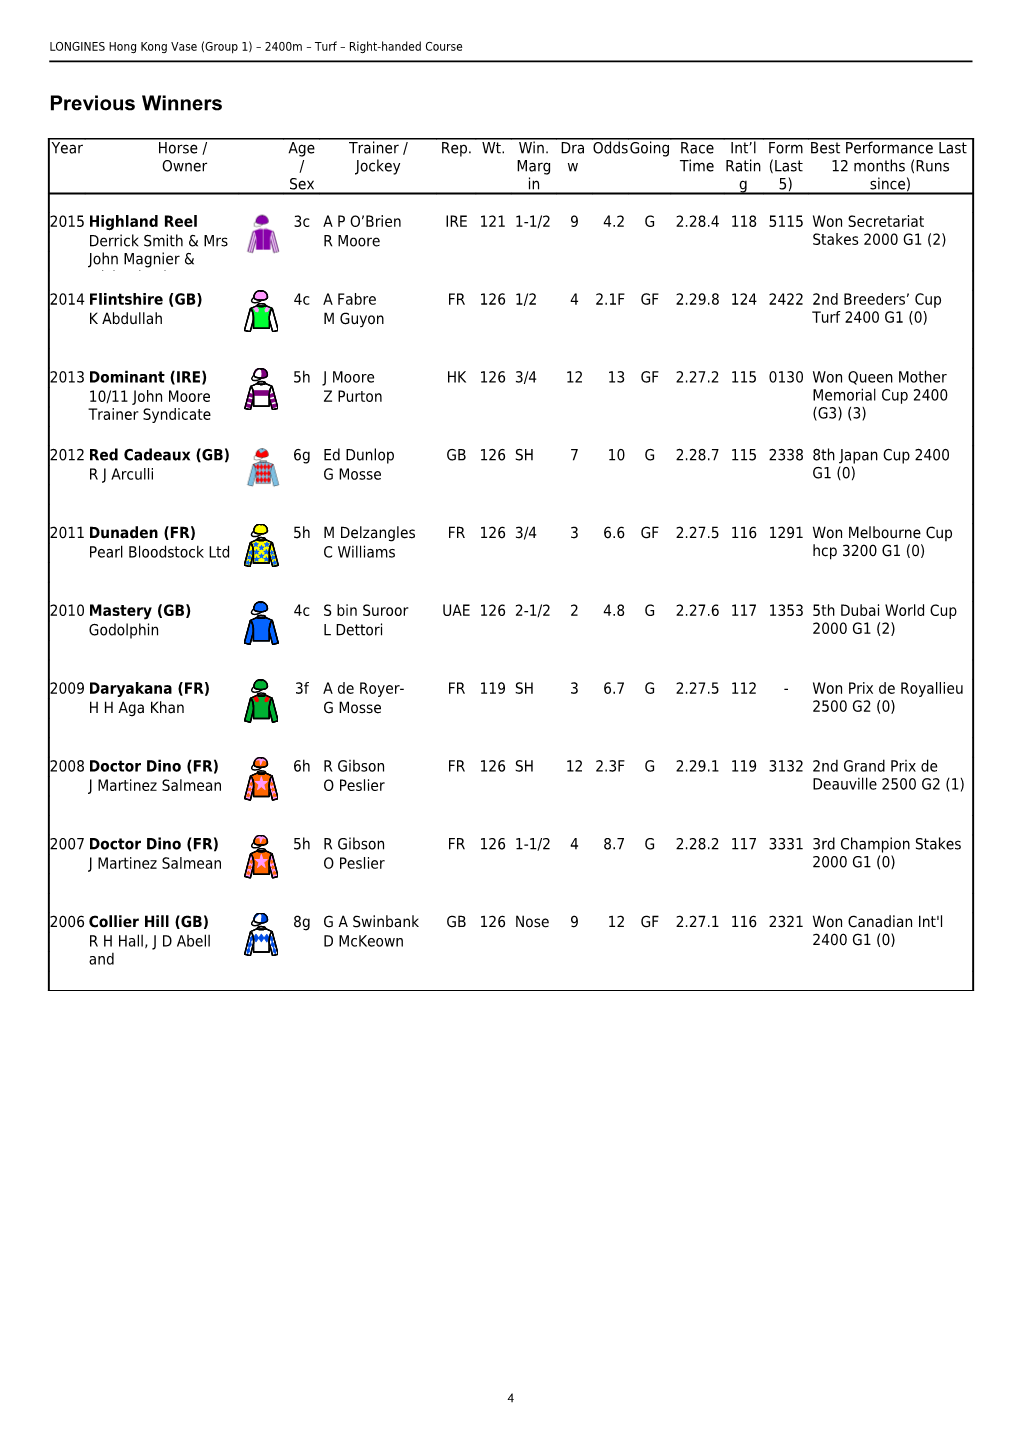 LONGINES Hong Kong Vase (Group 1) 2400M Turf Right-Handed Course